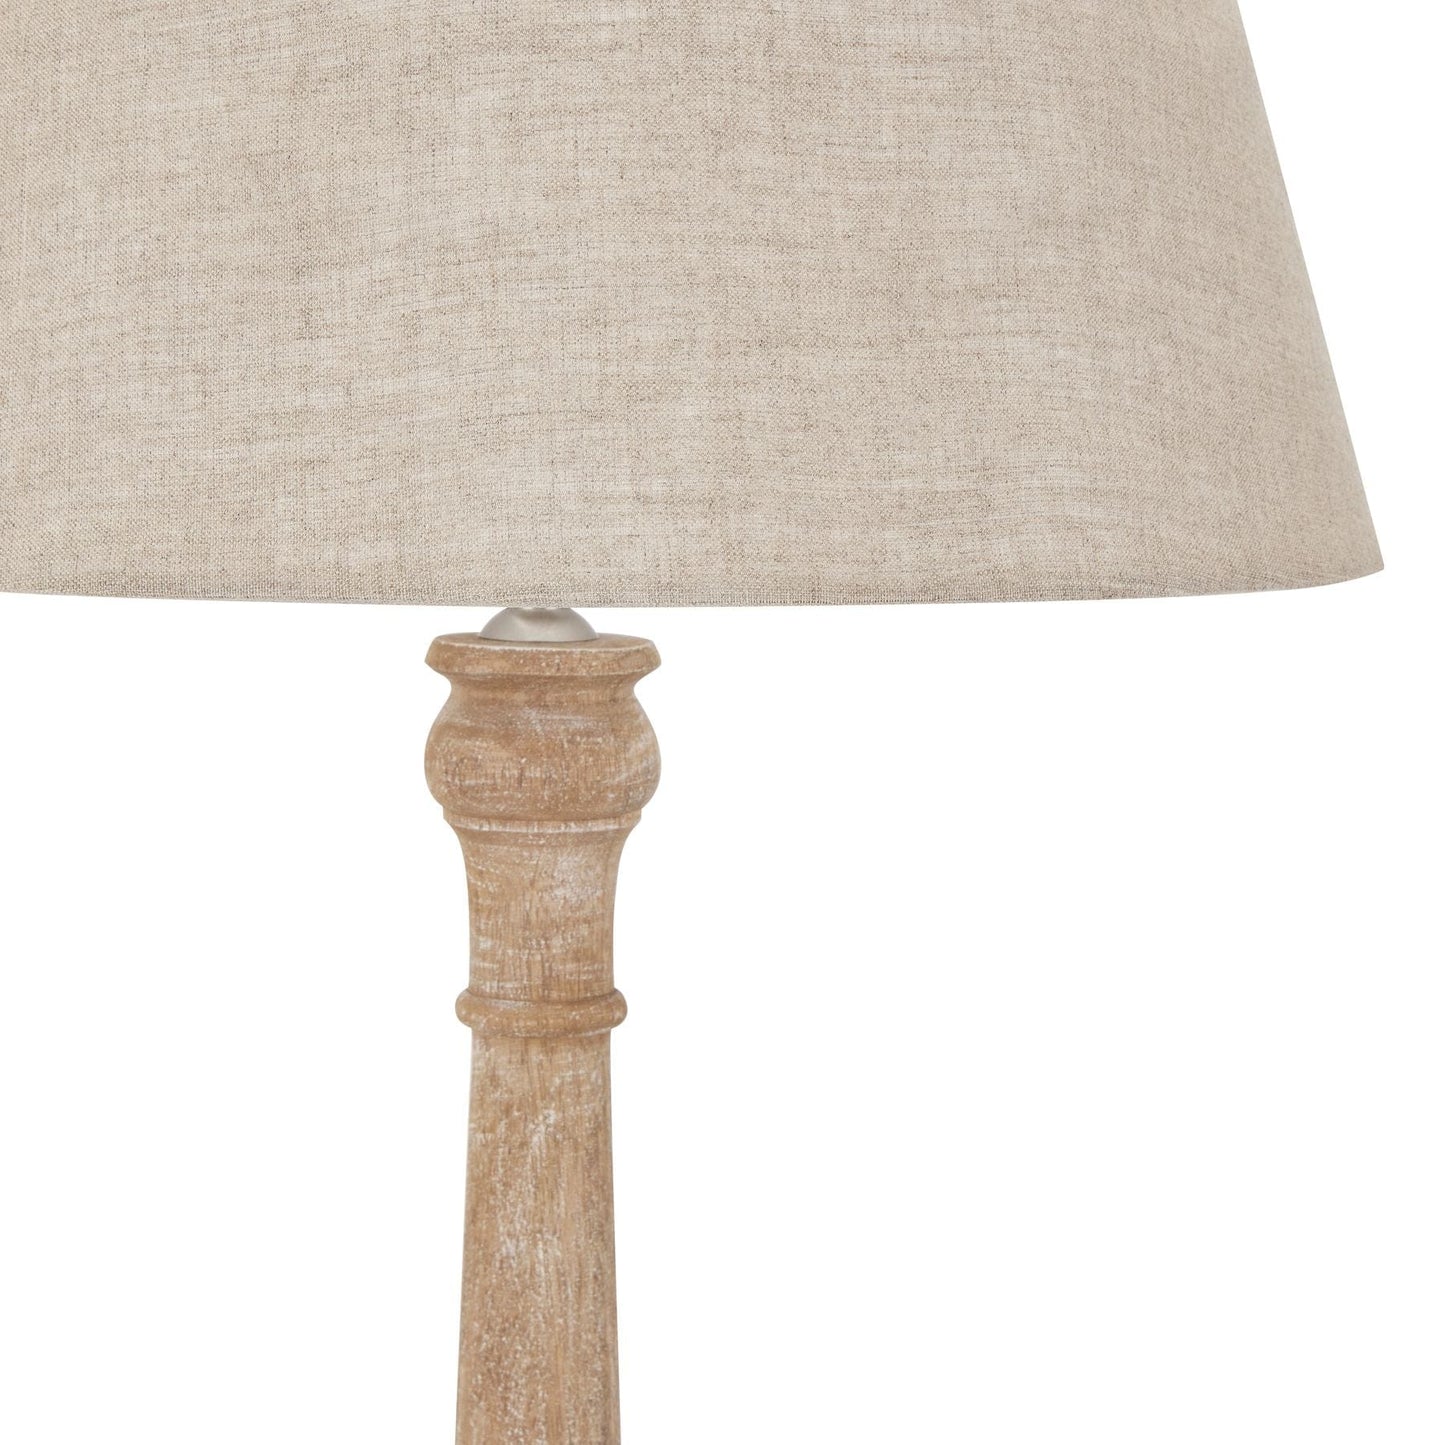 Hill Interiors Table Lamp Delaney Natural Wash Spindle Lamp With Linen Shade